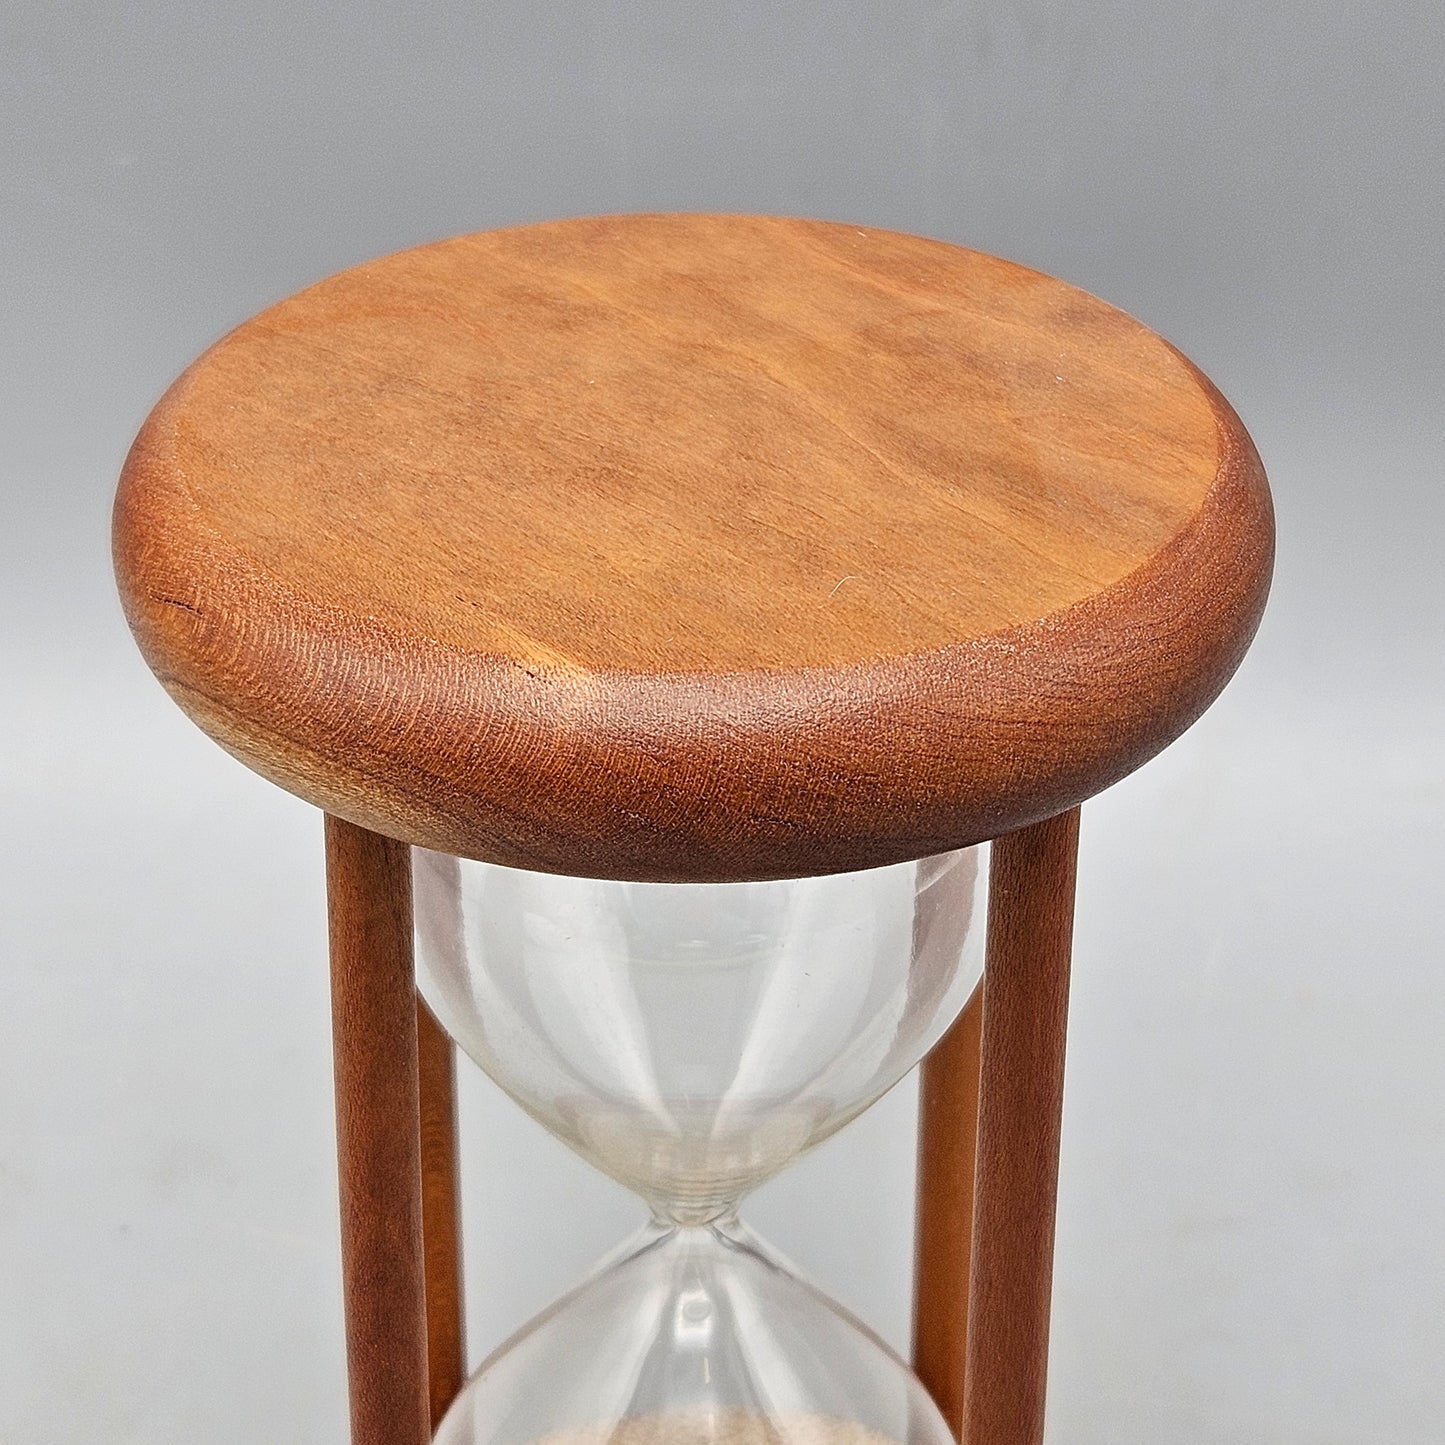 Small Wooden Hourglass